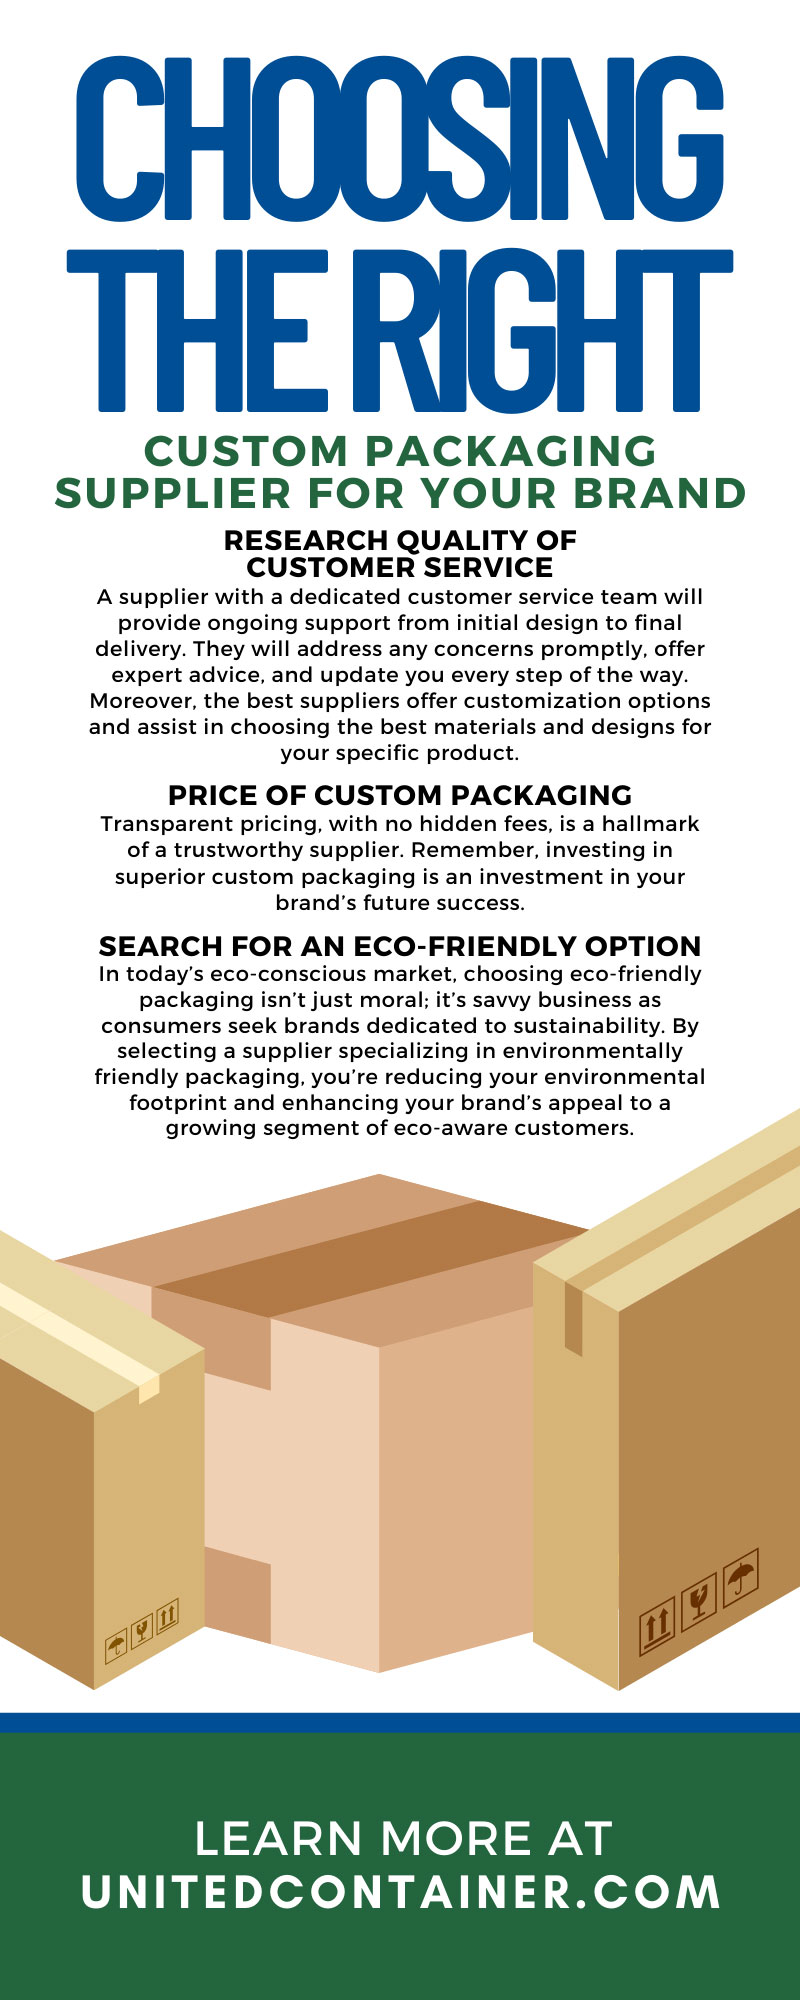 Choosing the Right Custom Packaging Supplier for Your Brand